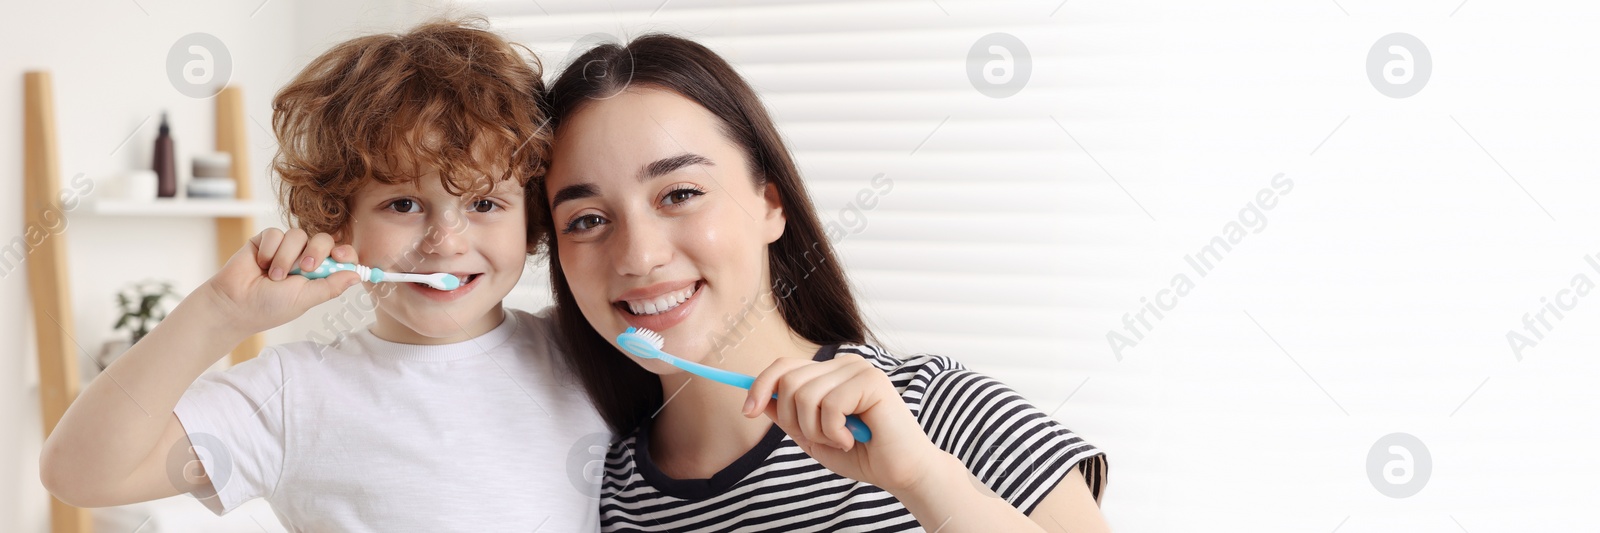 Image of Mother and her son brushing teeth together in bathroom. Banner design with space for text